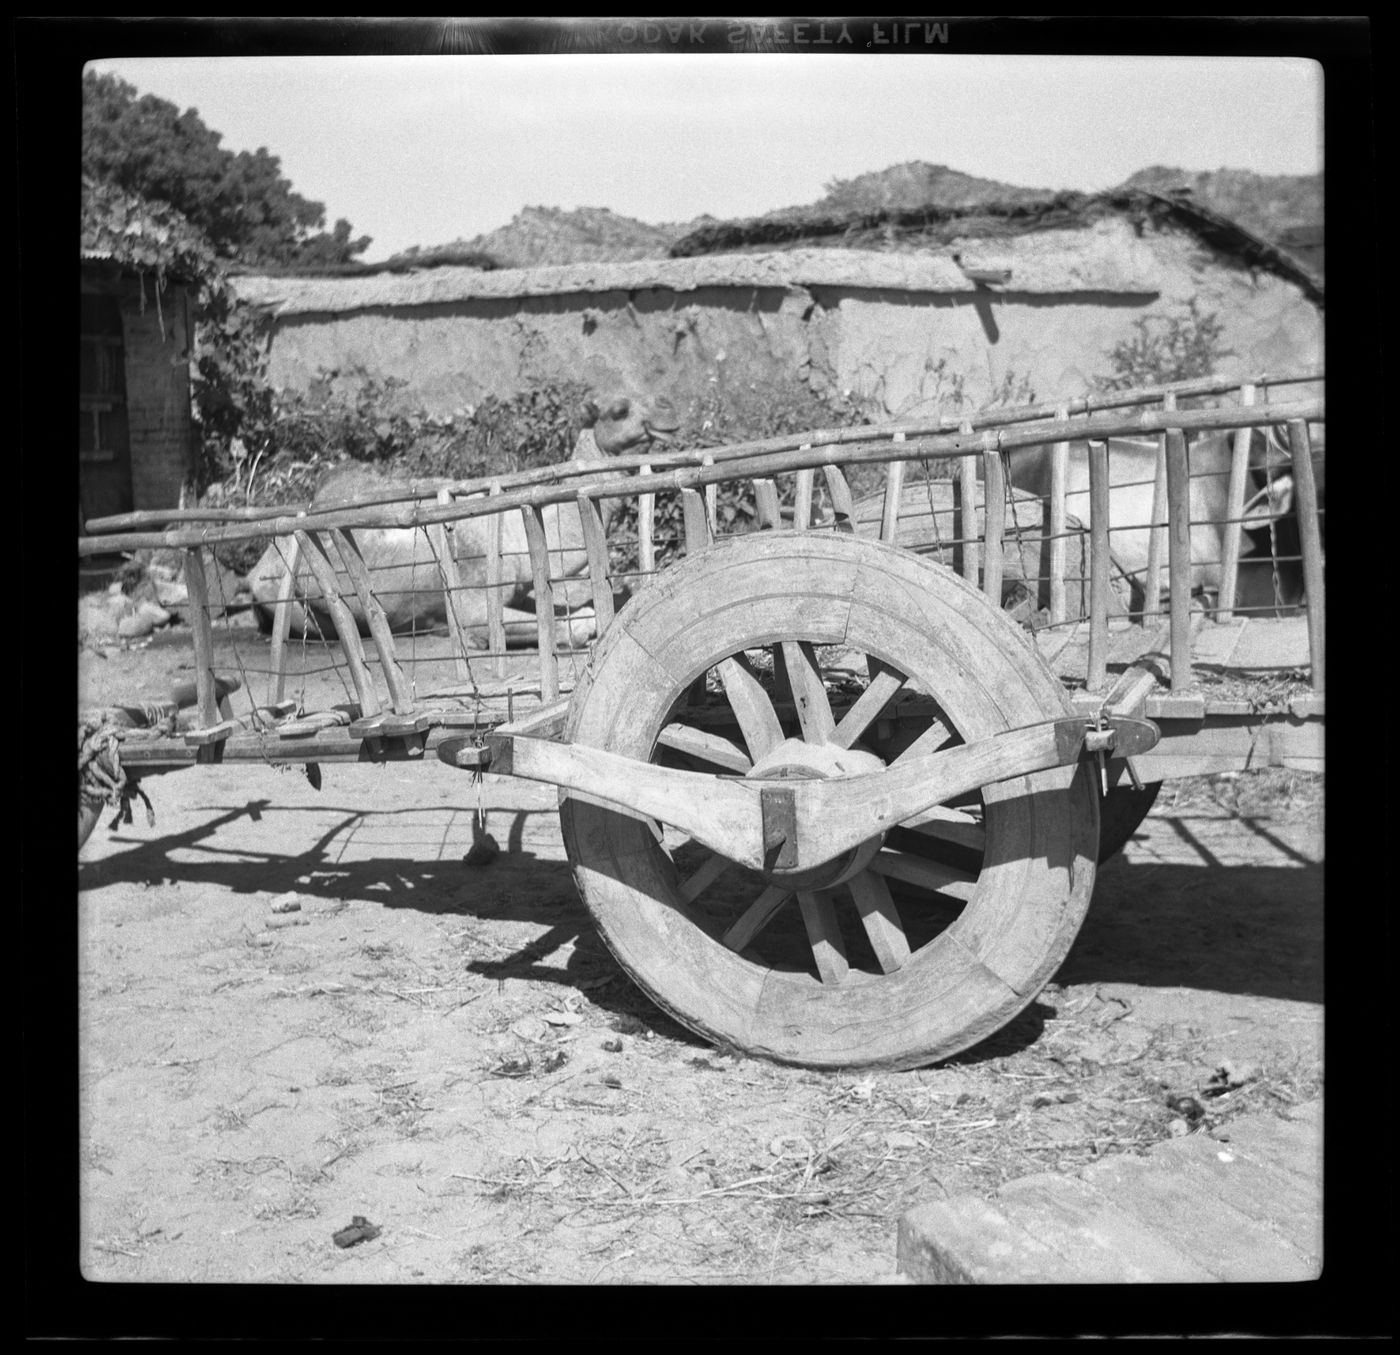 Cart near a rural house in Chandigarh's area before the construction, India